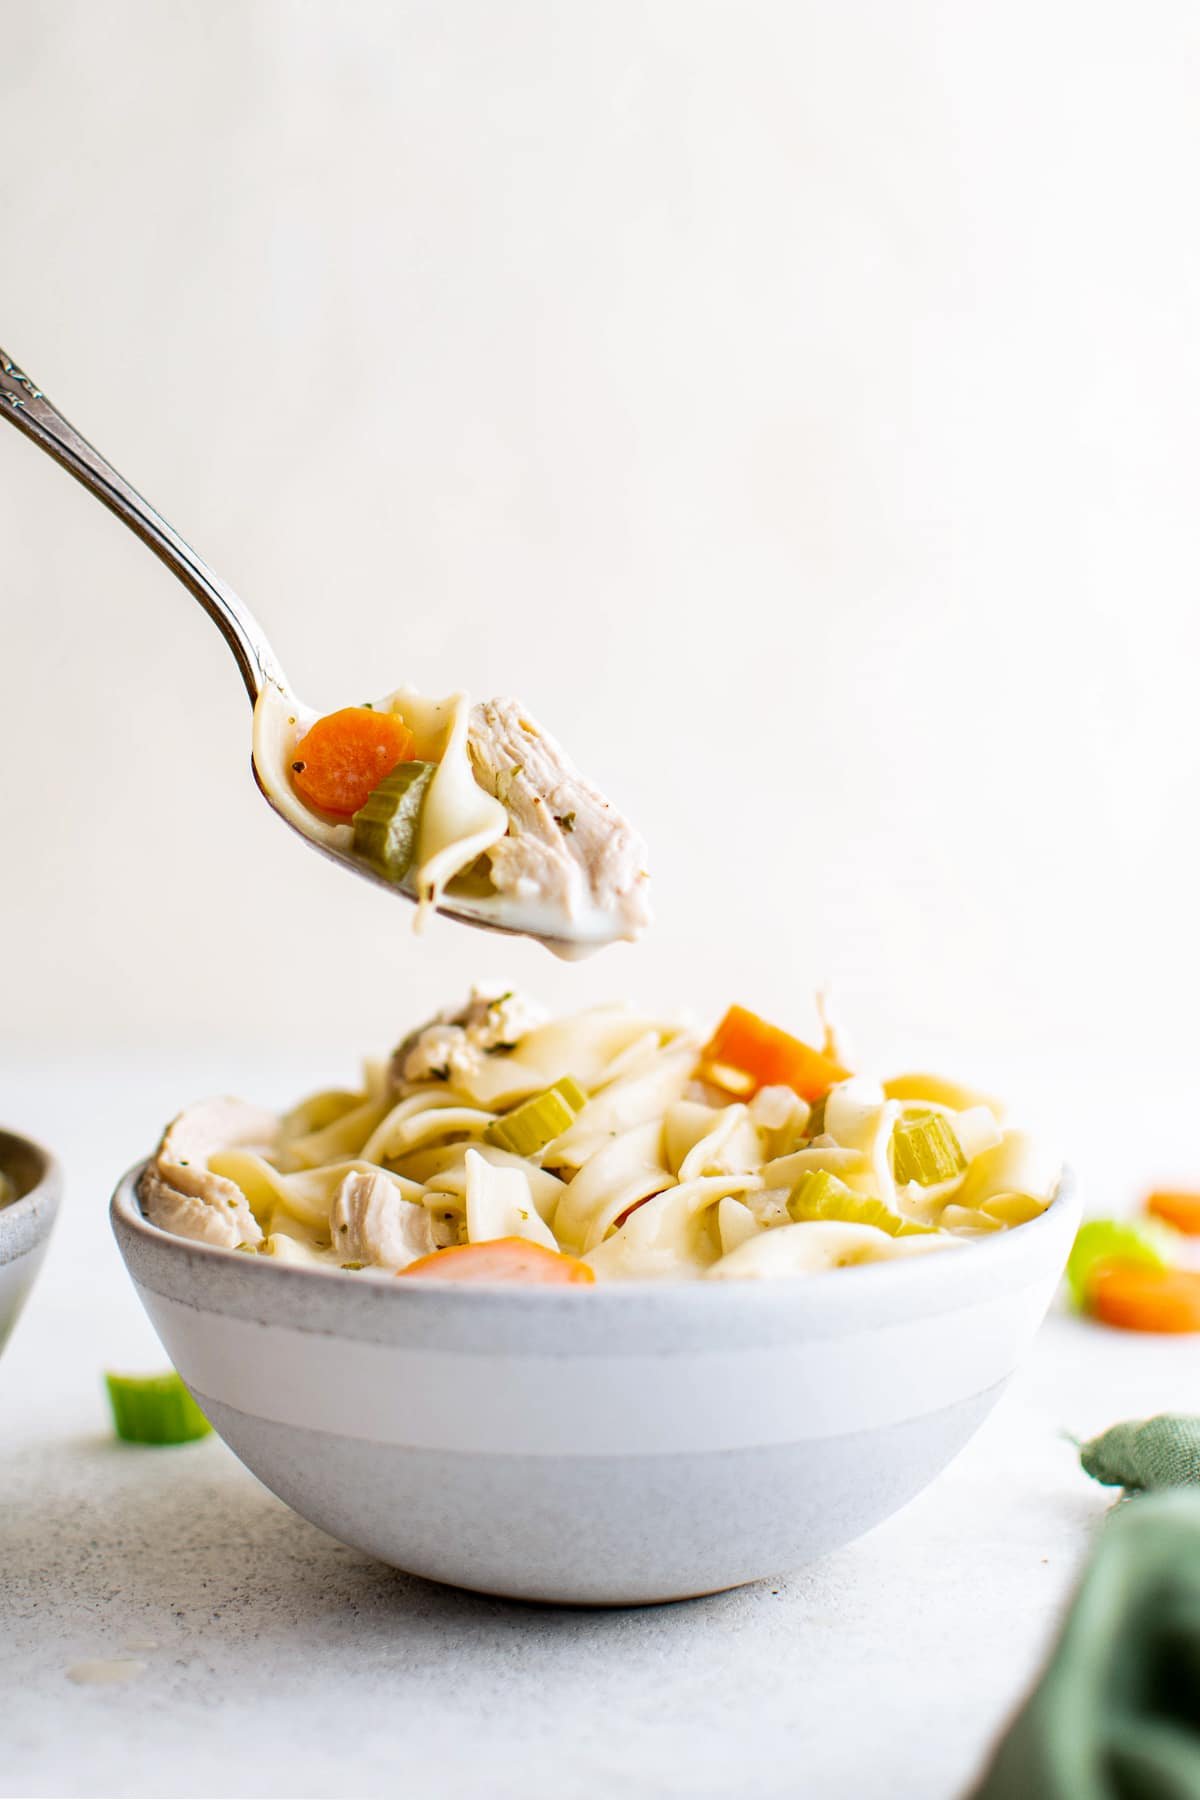 Metal spoon filled with creamy chicken noodle soup hovering above a white soup bowl filled with creamy chicken noodle soup.